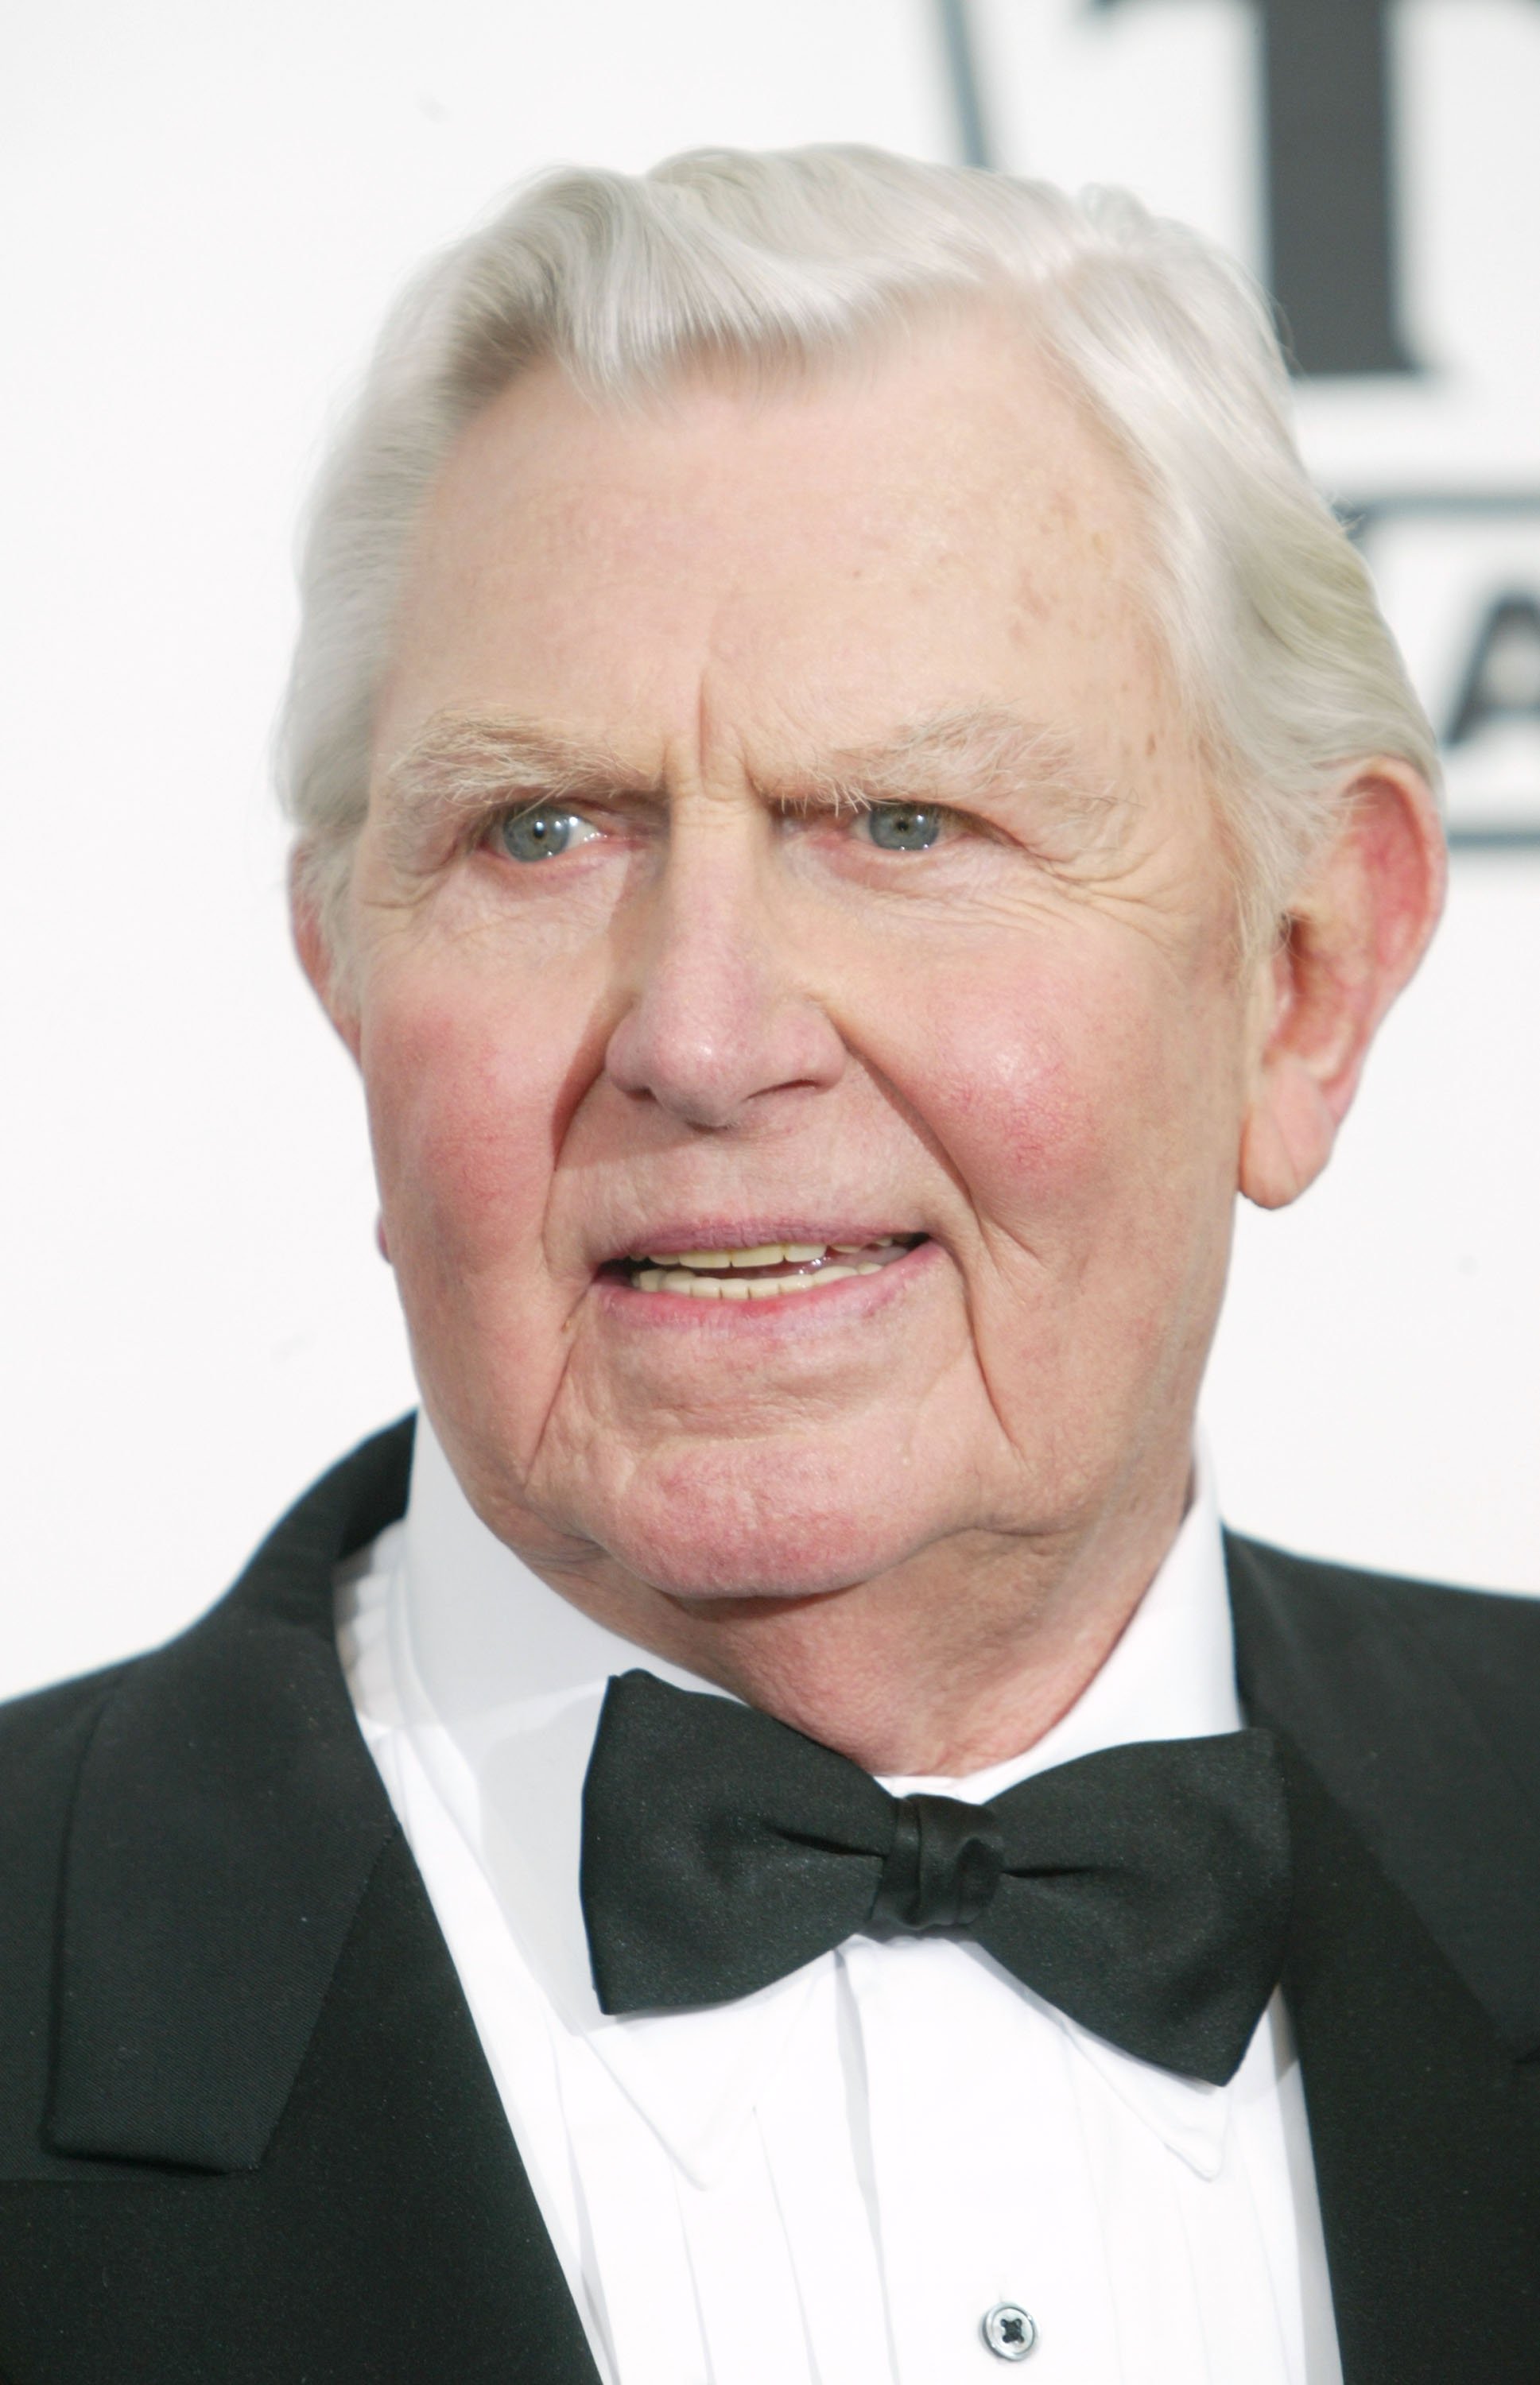 Actor Andy Griffith poses backstage at the 2nd Annual TV Land Awards held on March 7, 2004 at The Hollywood Palladium, in Hollywood, California. | Source: Getty Images